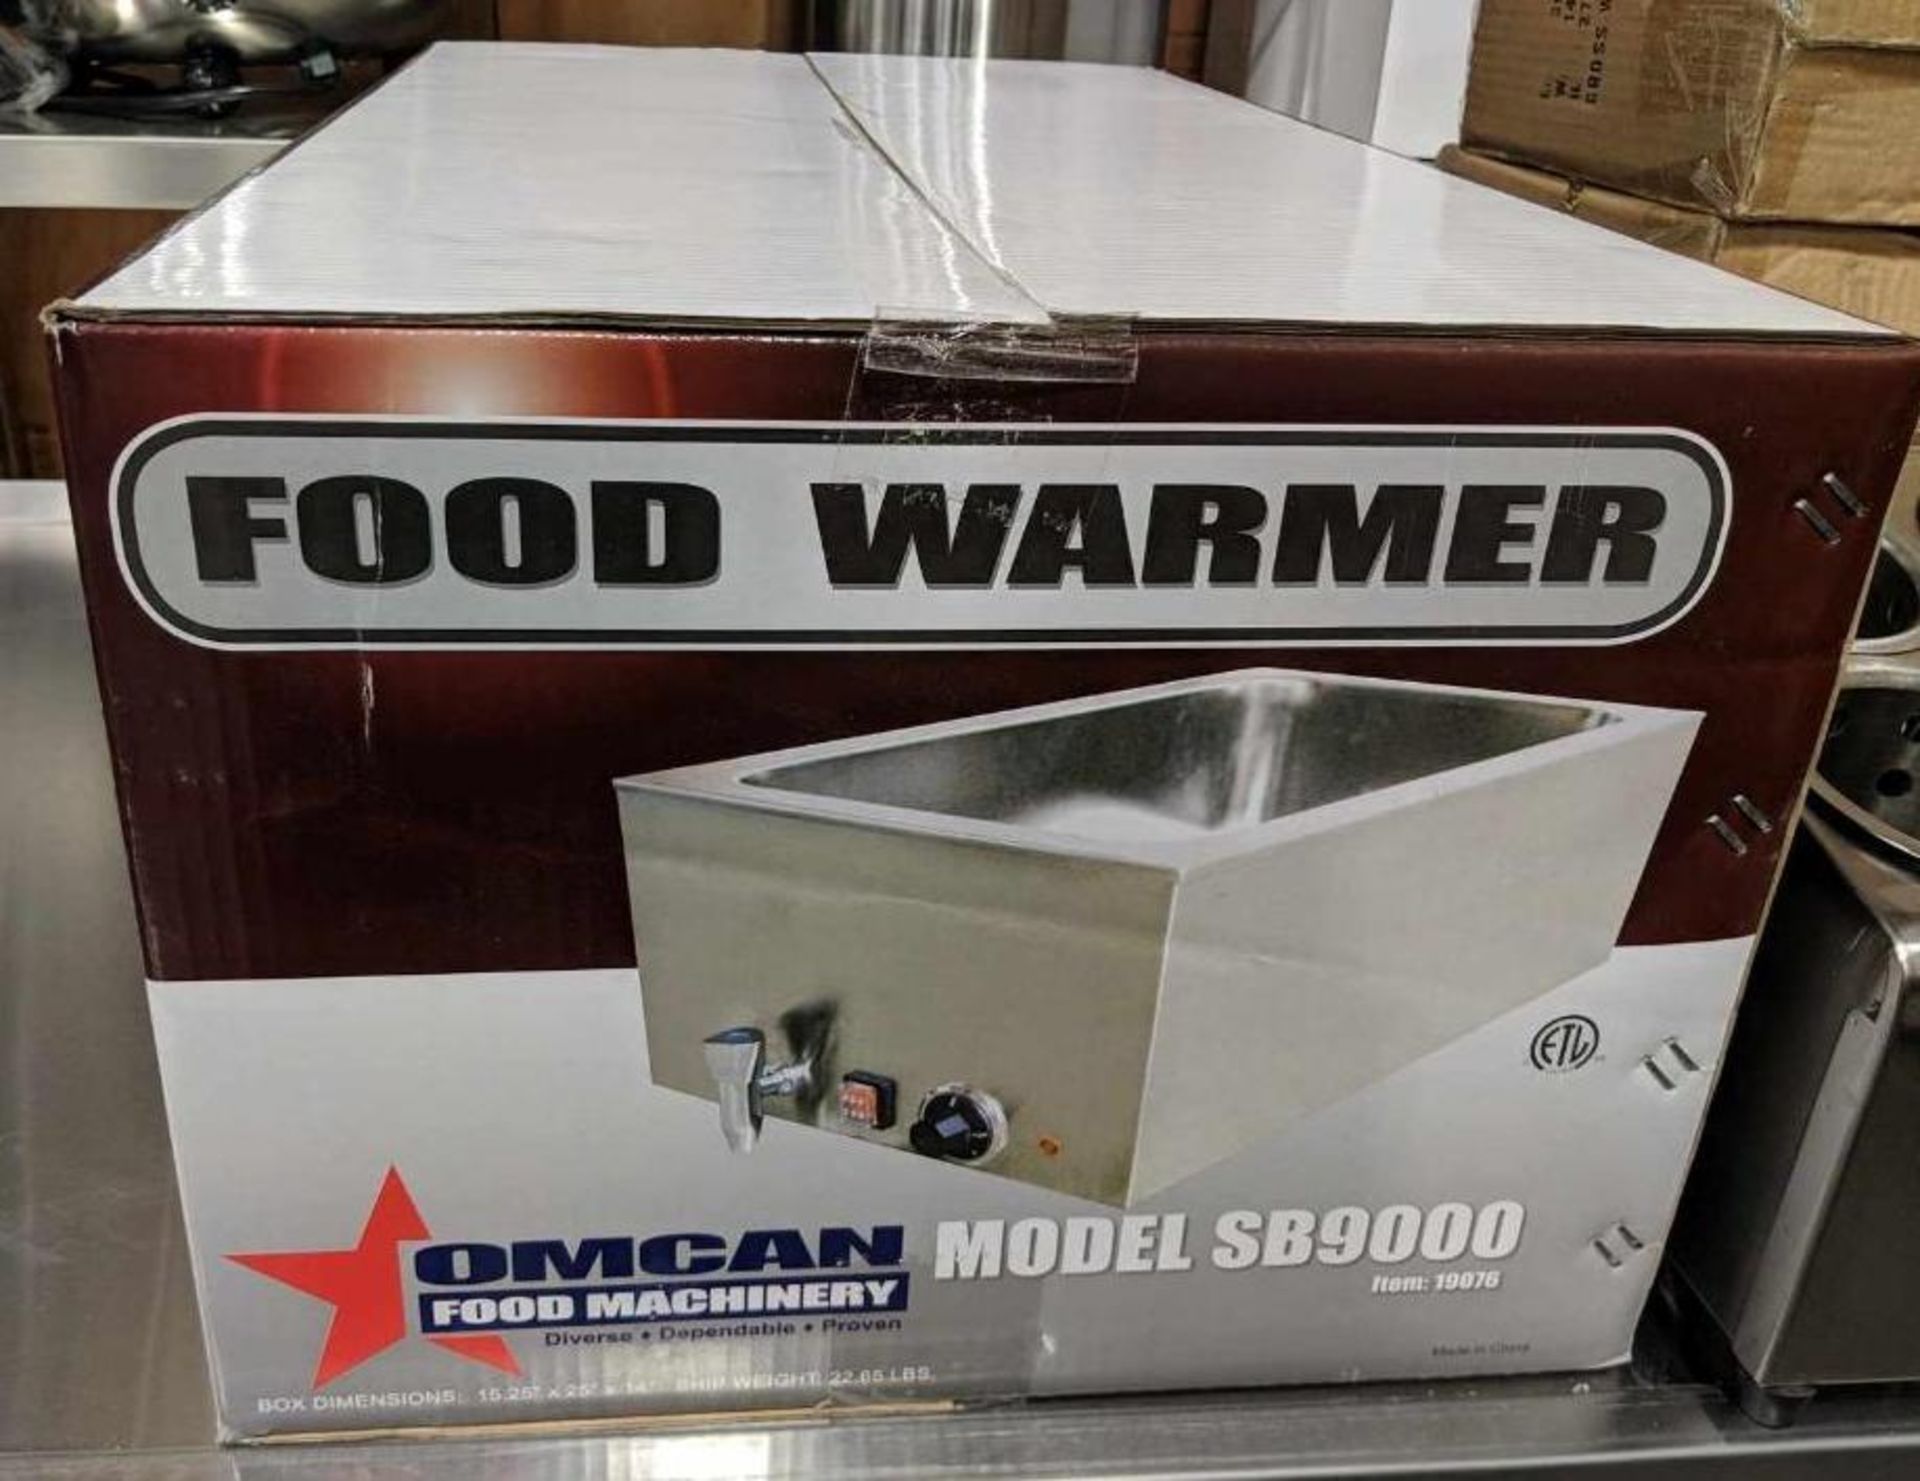 OMCAN FULL SIZE FOOD WARMER WITH DRAIN, OMCAN SB9000 ITEM#19076 - NEW - Image 2 of 3